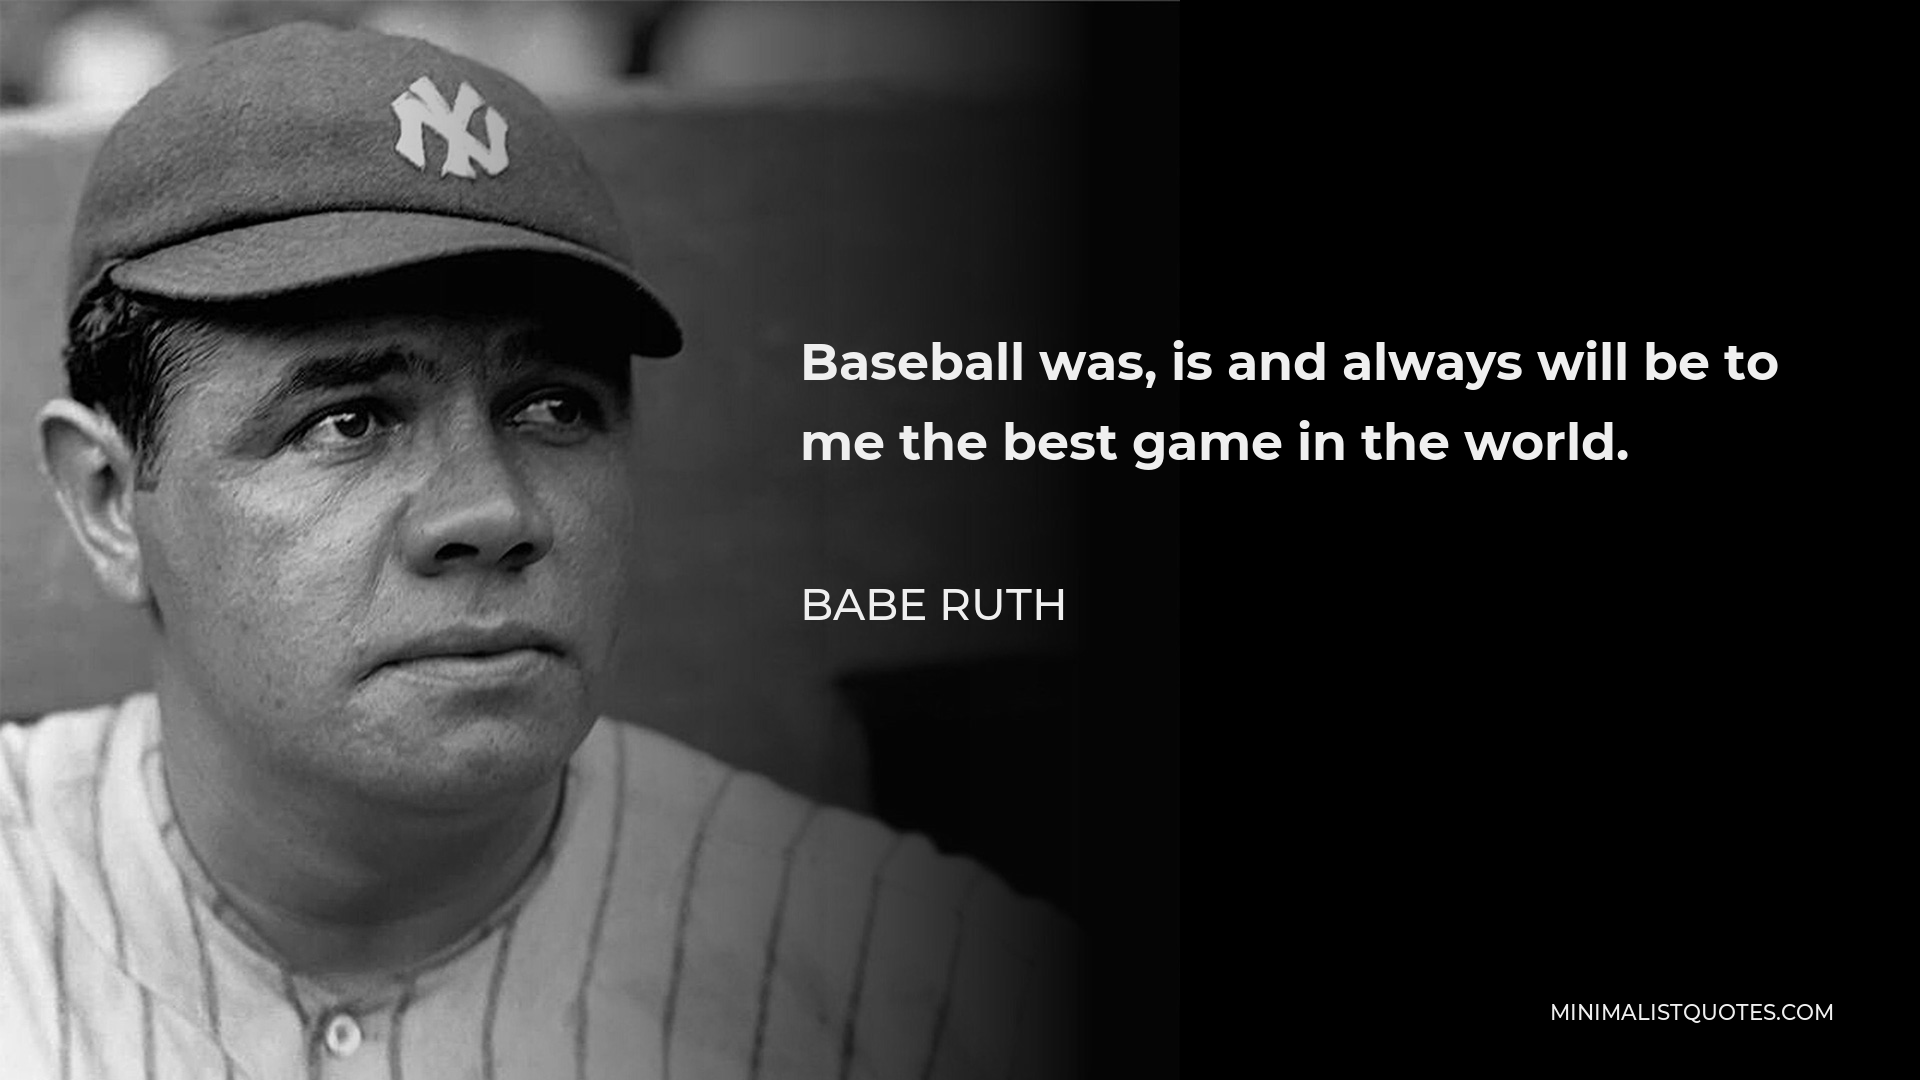 Babe Ruth Quote - Baseball was, is and always will be to me the best game in the world.